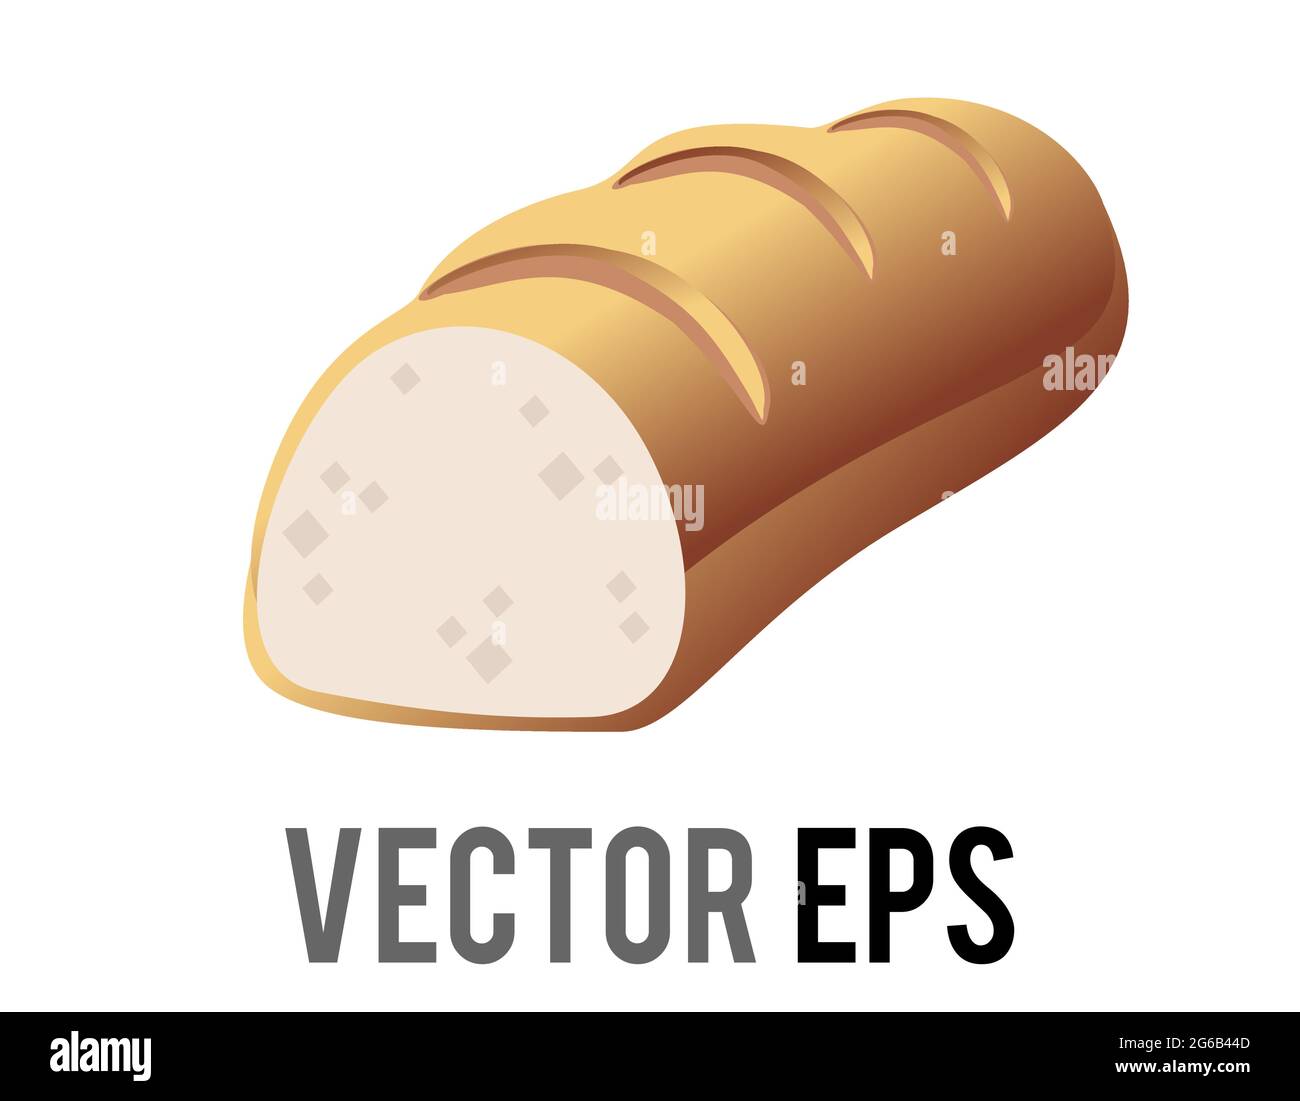 The isolated vector brown long, thin loaf of baguette France bread icon with scoring on golden brown crust Stock Vector